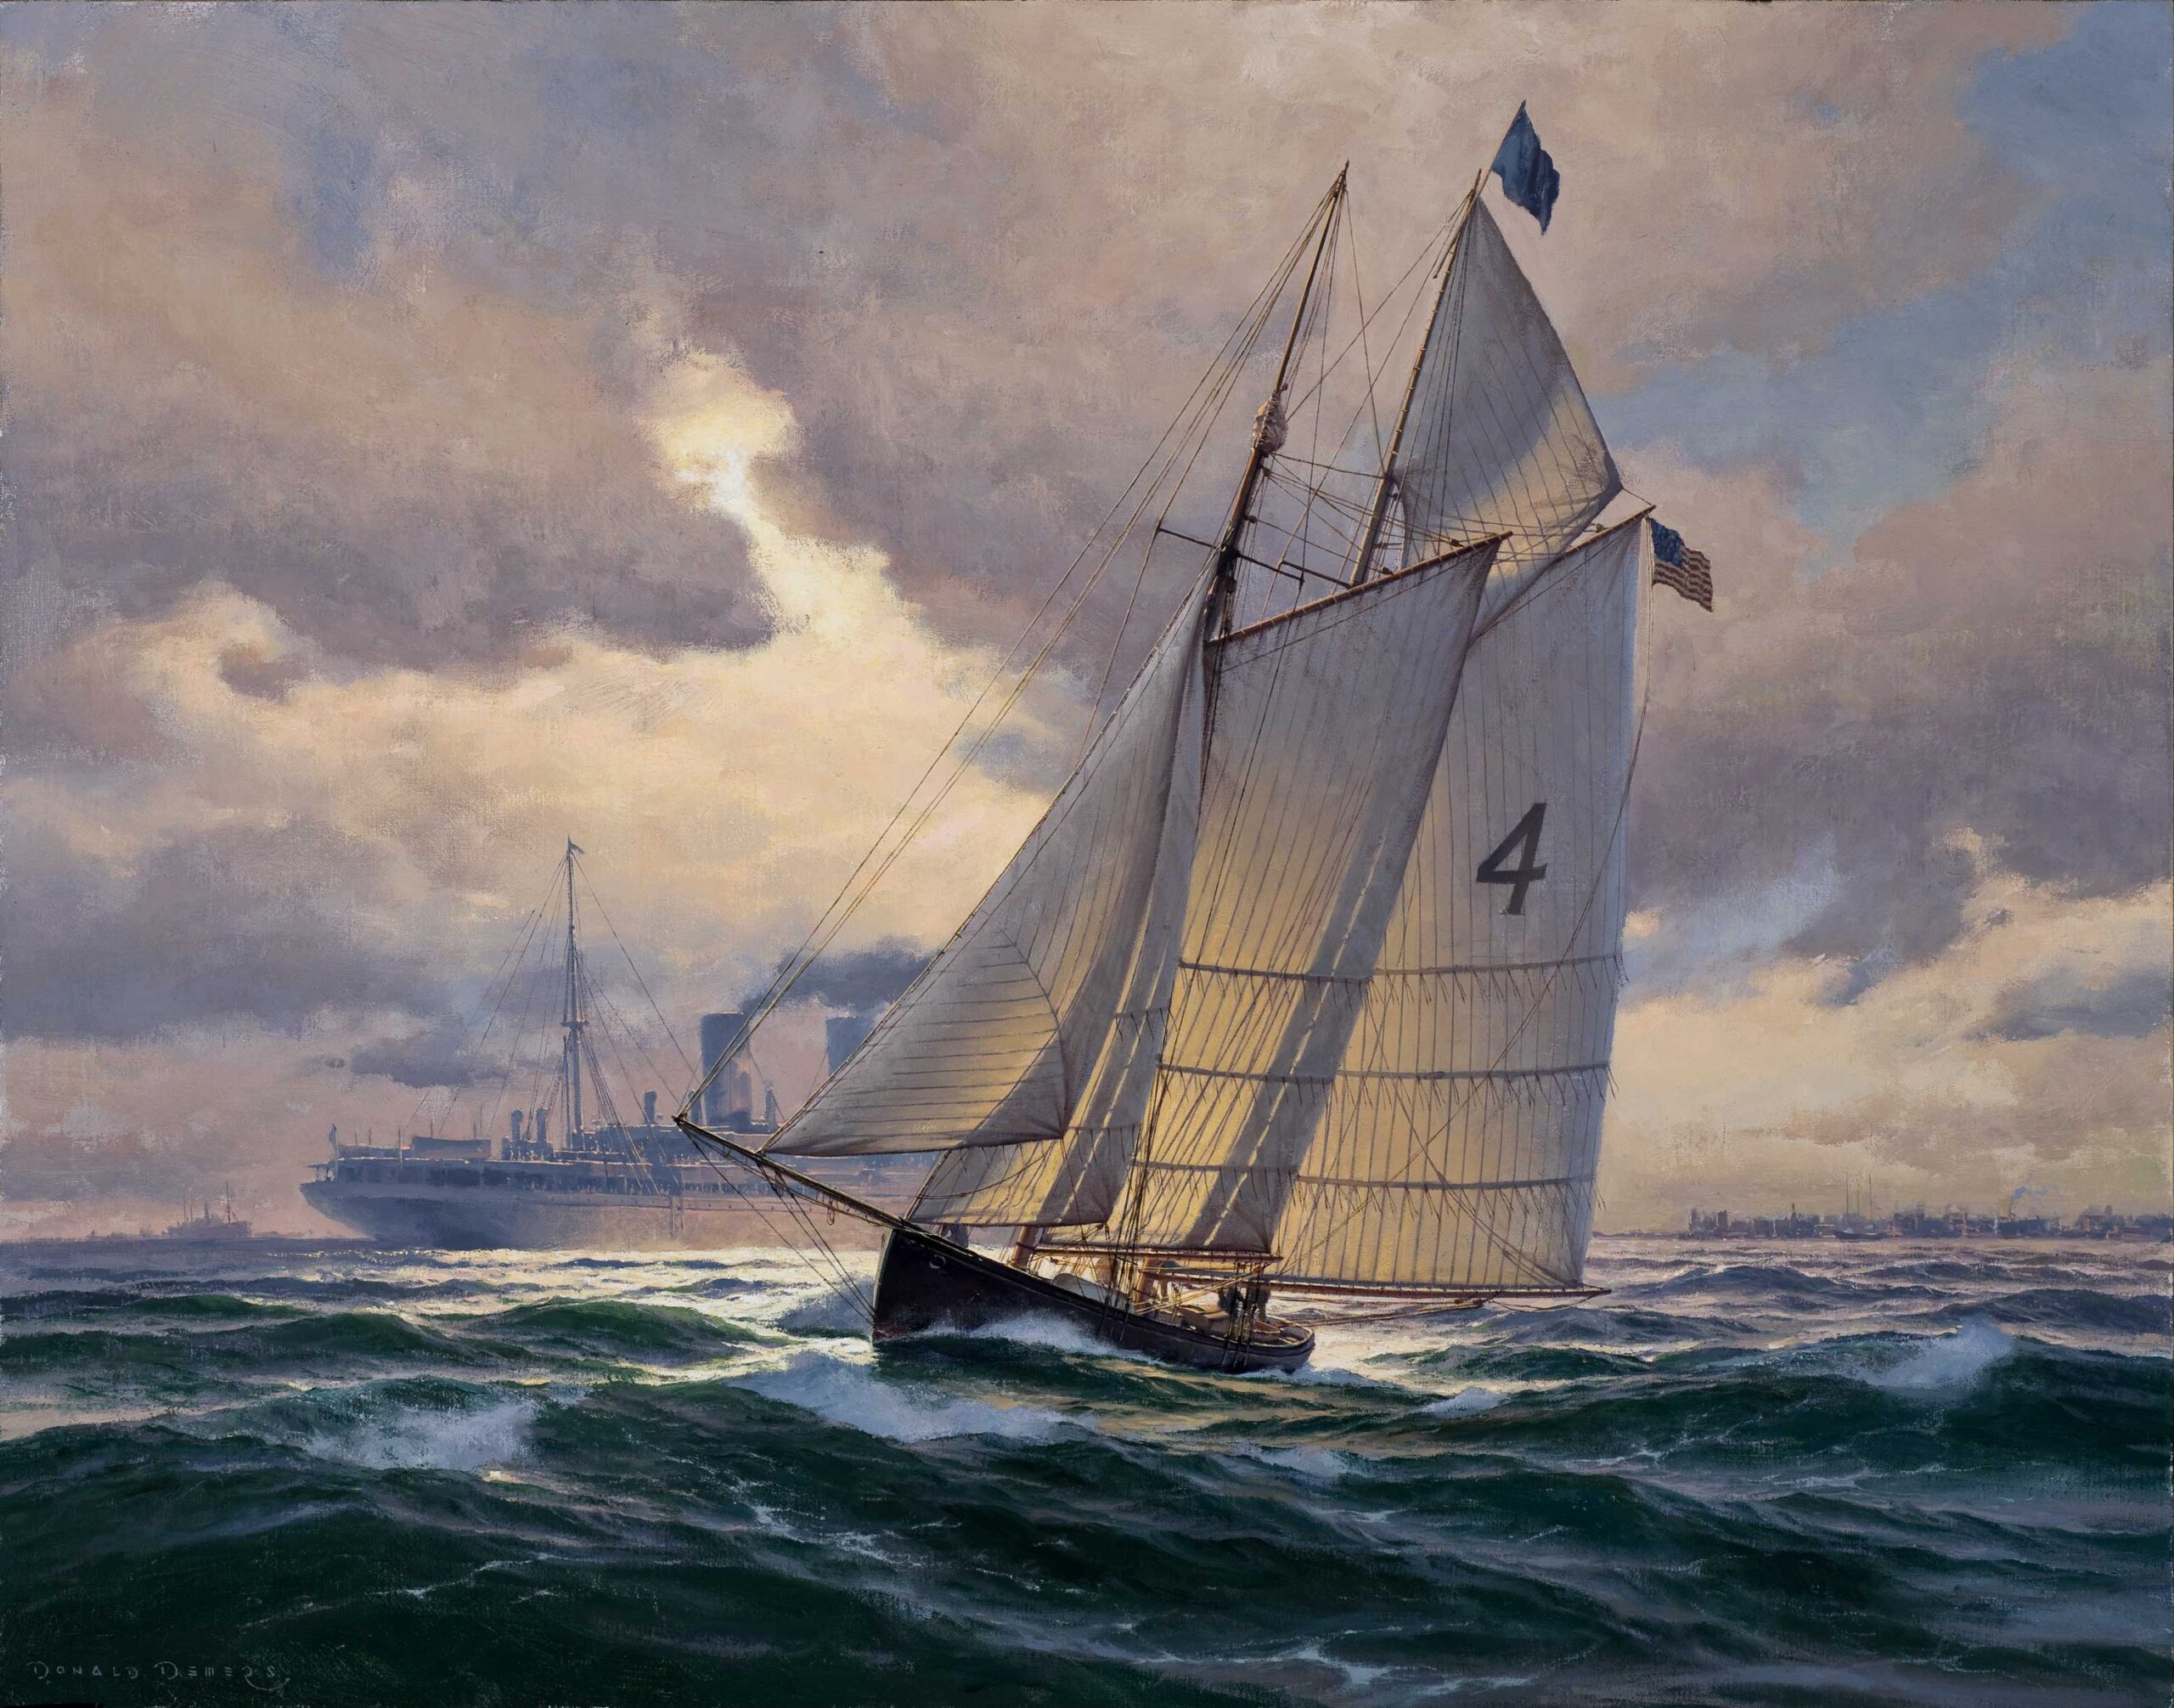 Marine art - Don Demers, “Changing Tides, New York Harbor,” 2015, oil, 24 x 28 in., Private collection, Studio